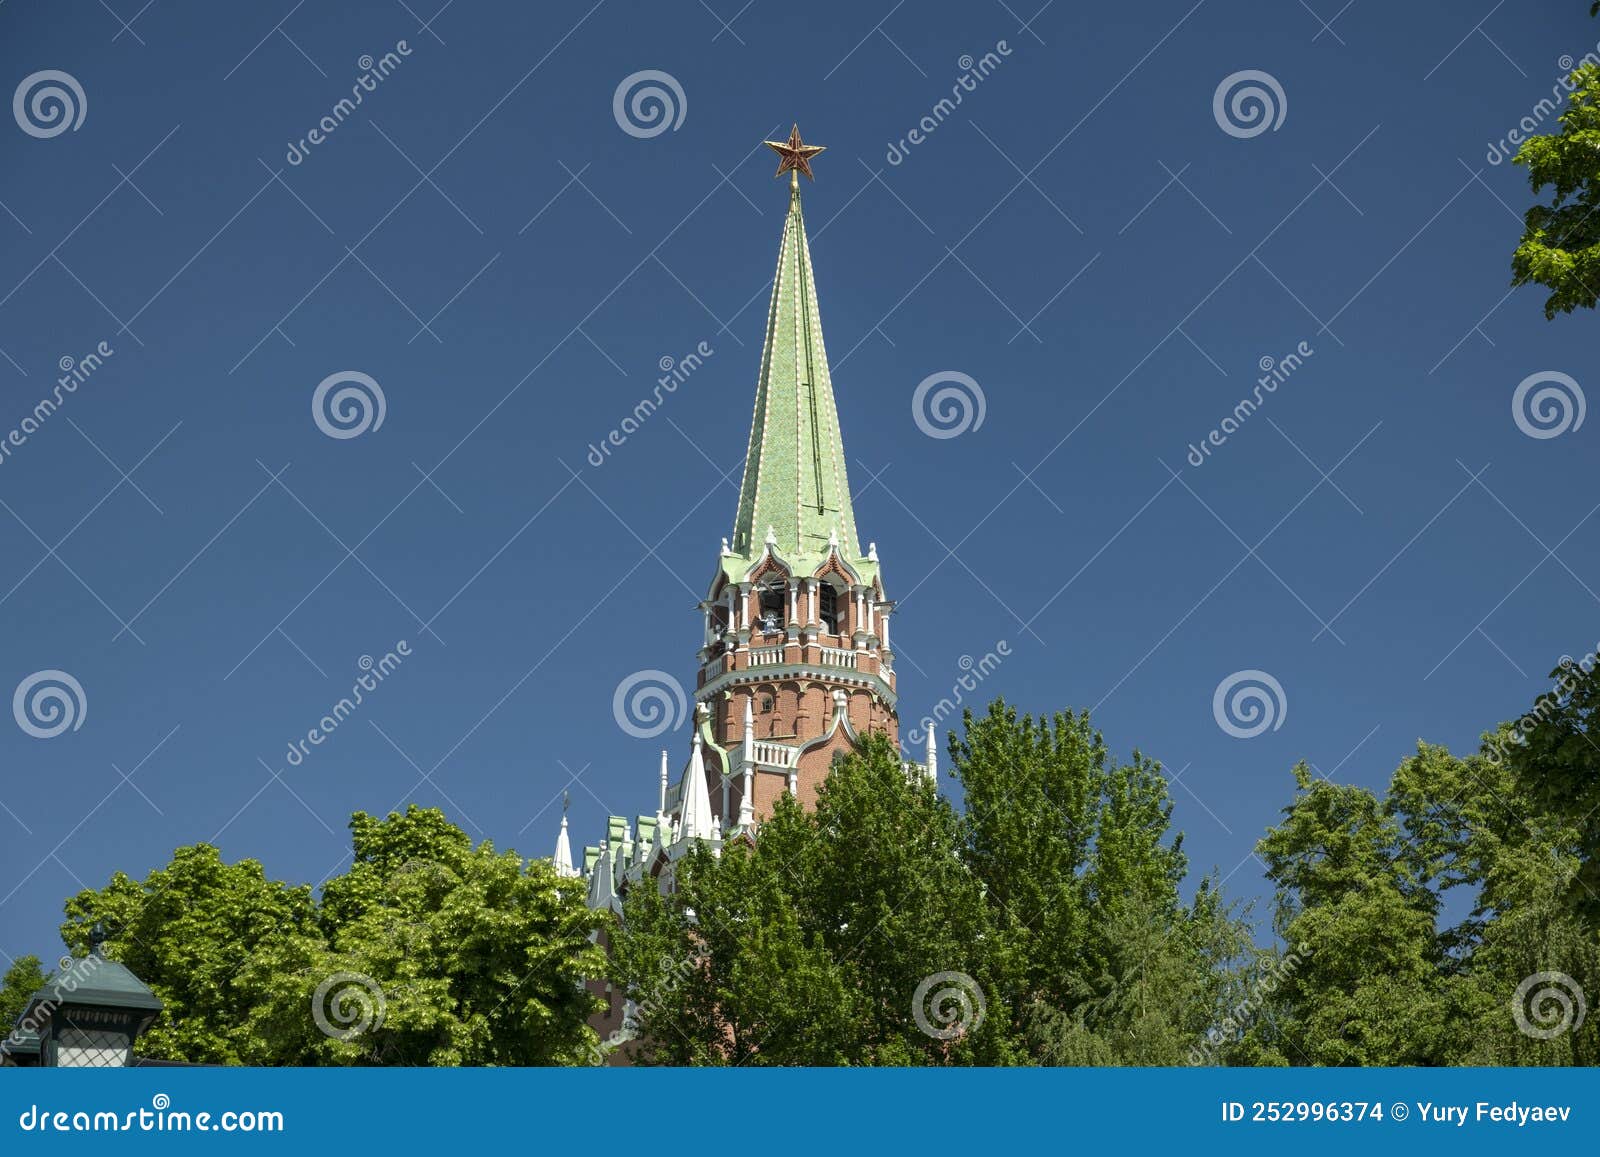 moscow kremlin, red square, moscow, russia, putin,